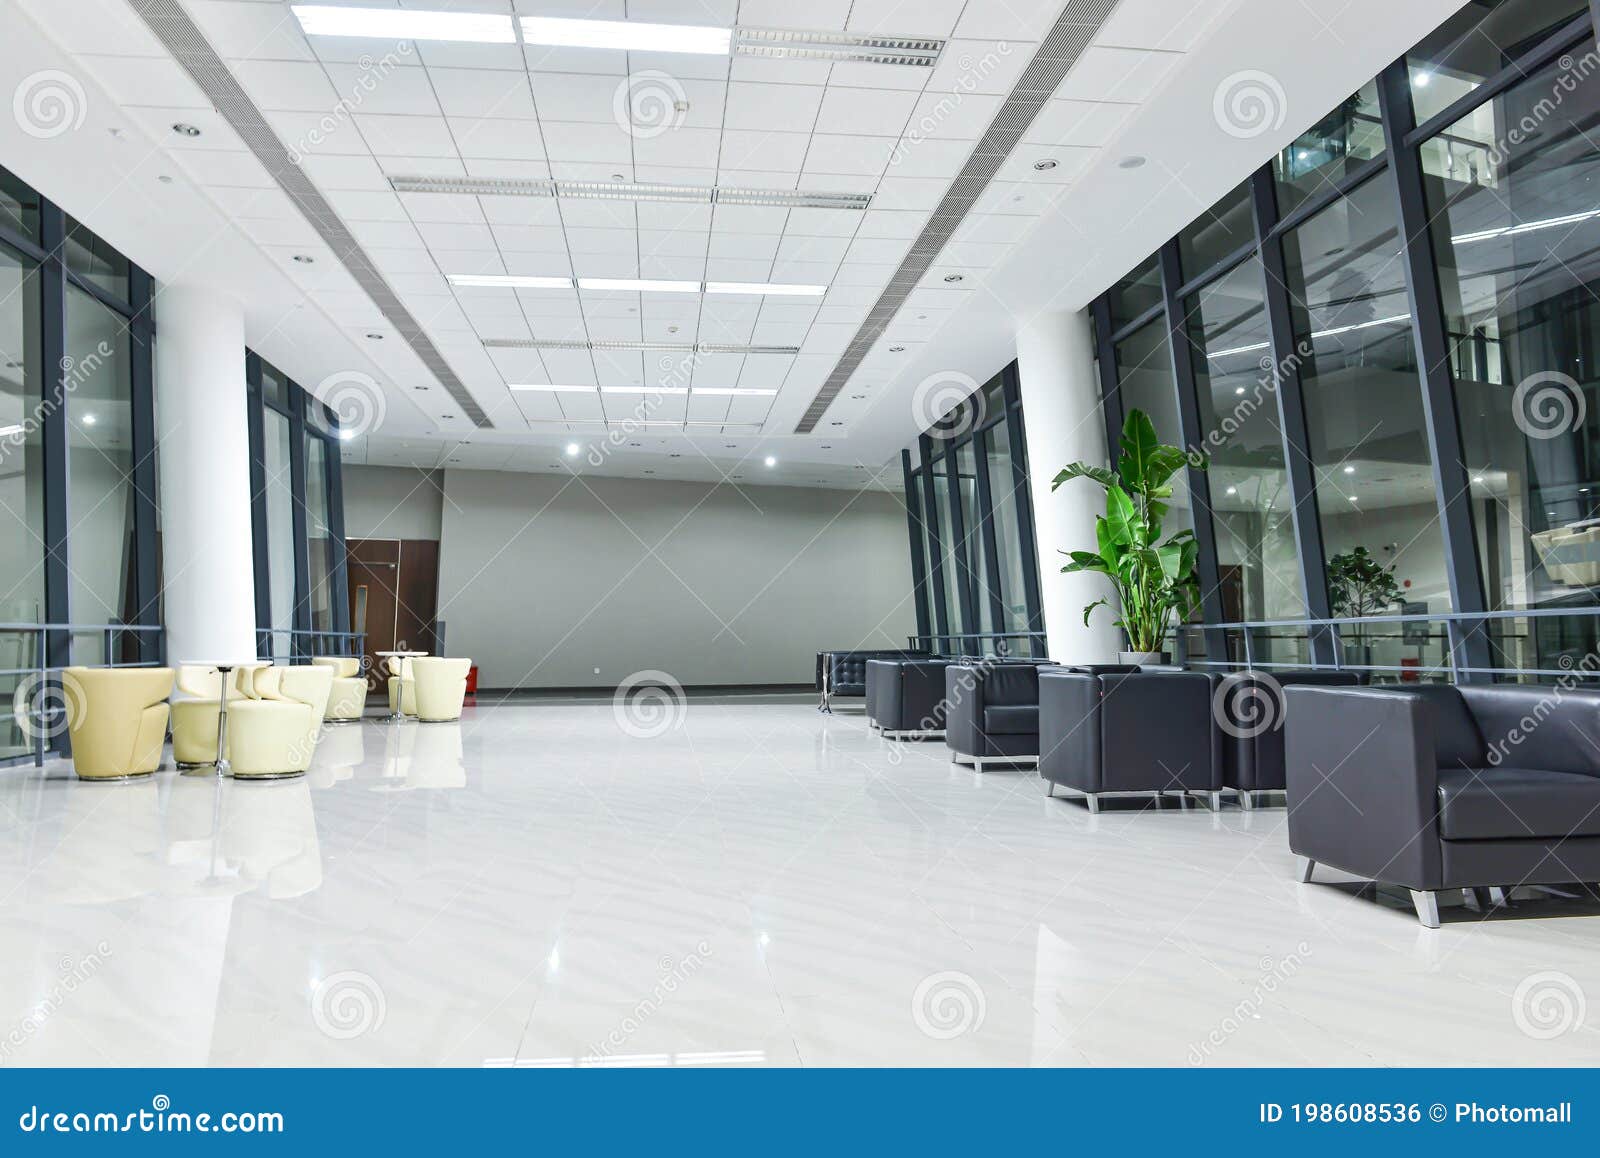 modern commercial building lobby office architecture waiting room